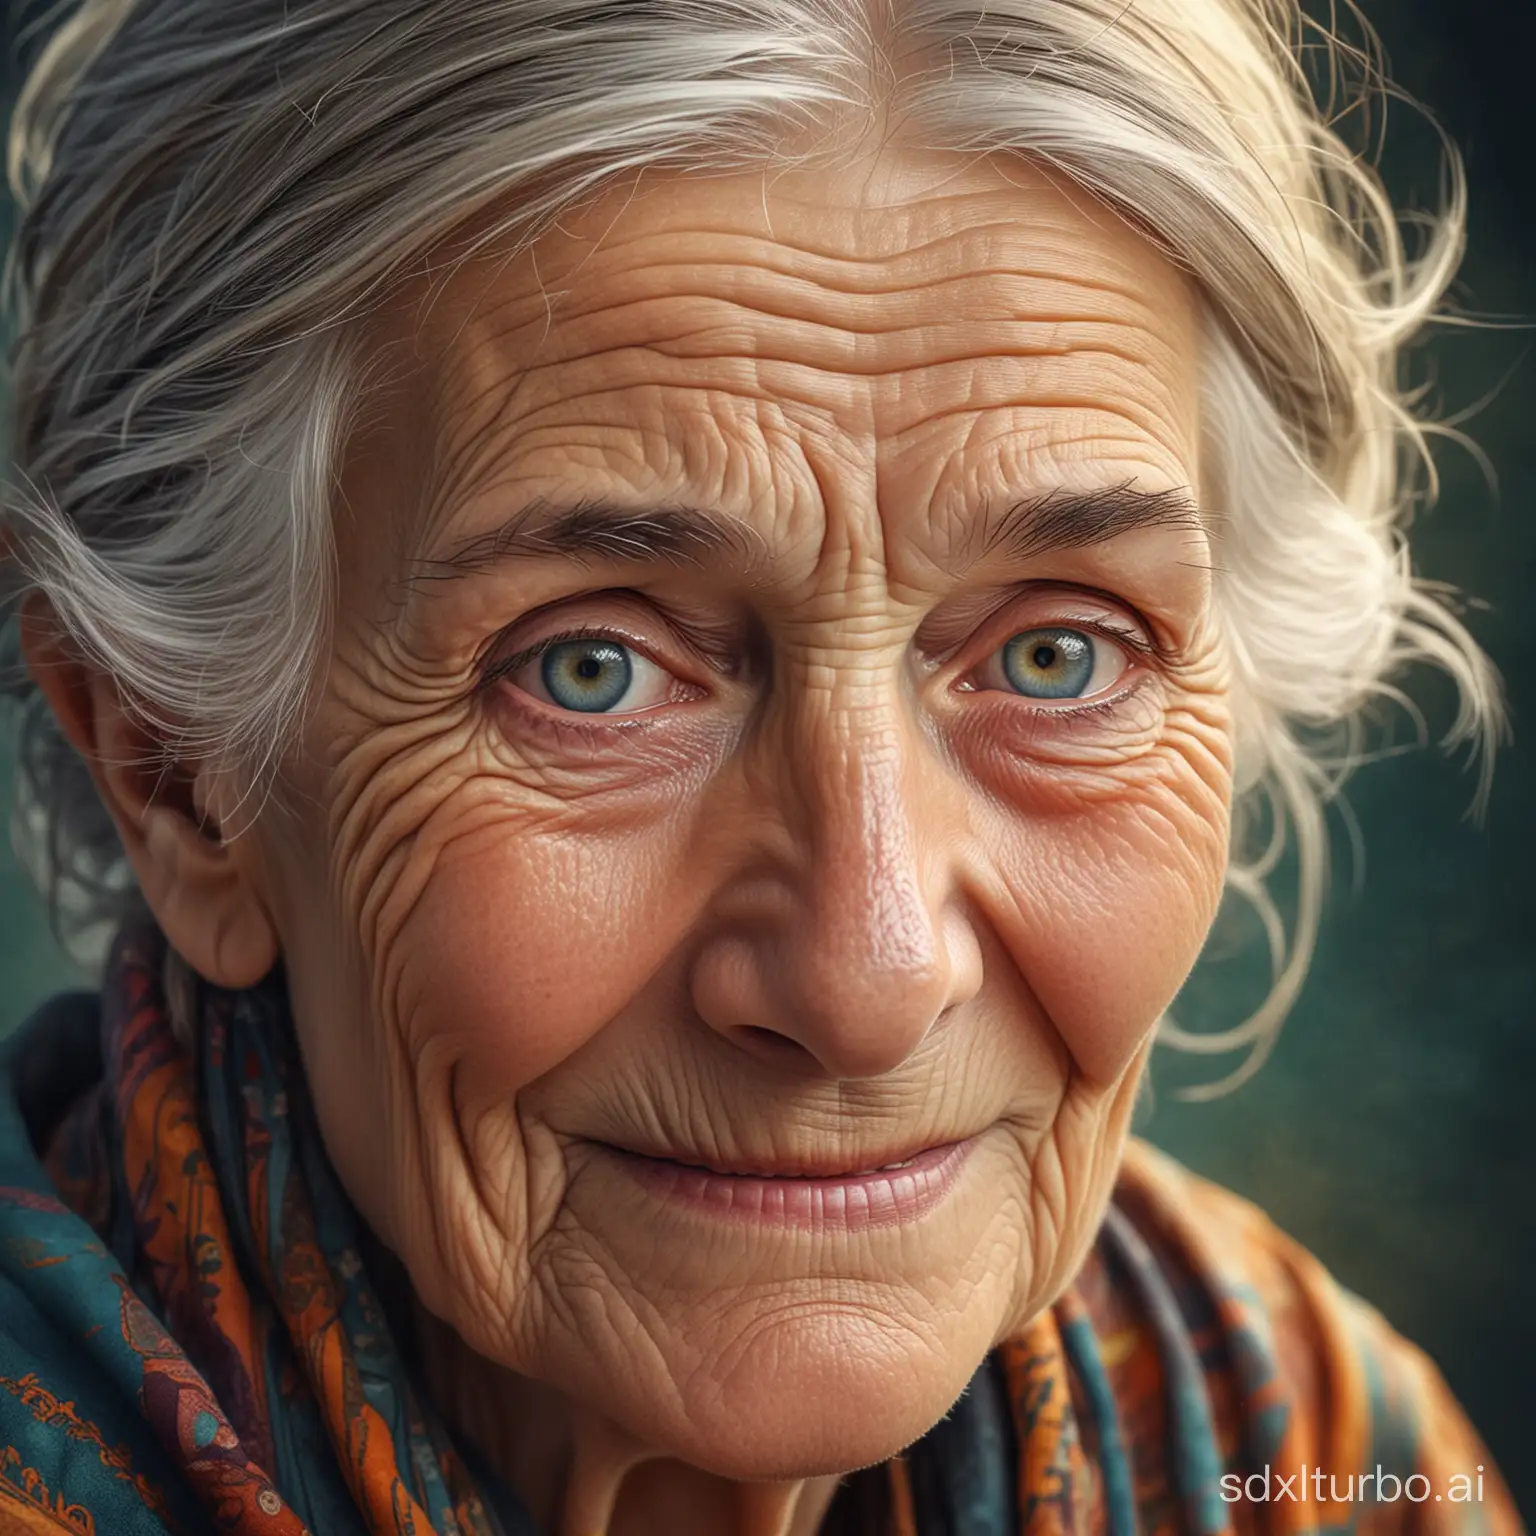 Elderly-Womans-Compassionate-Smile-in-Psychedelic-Digital-Art